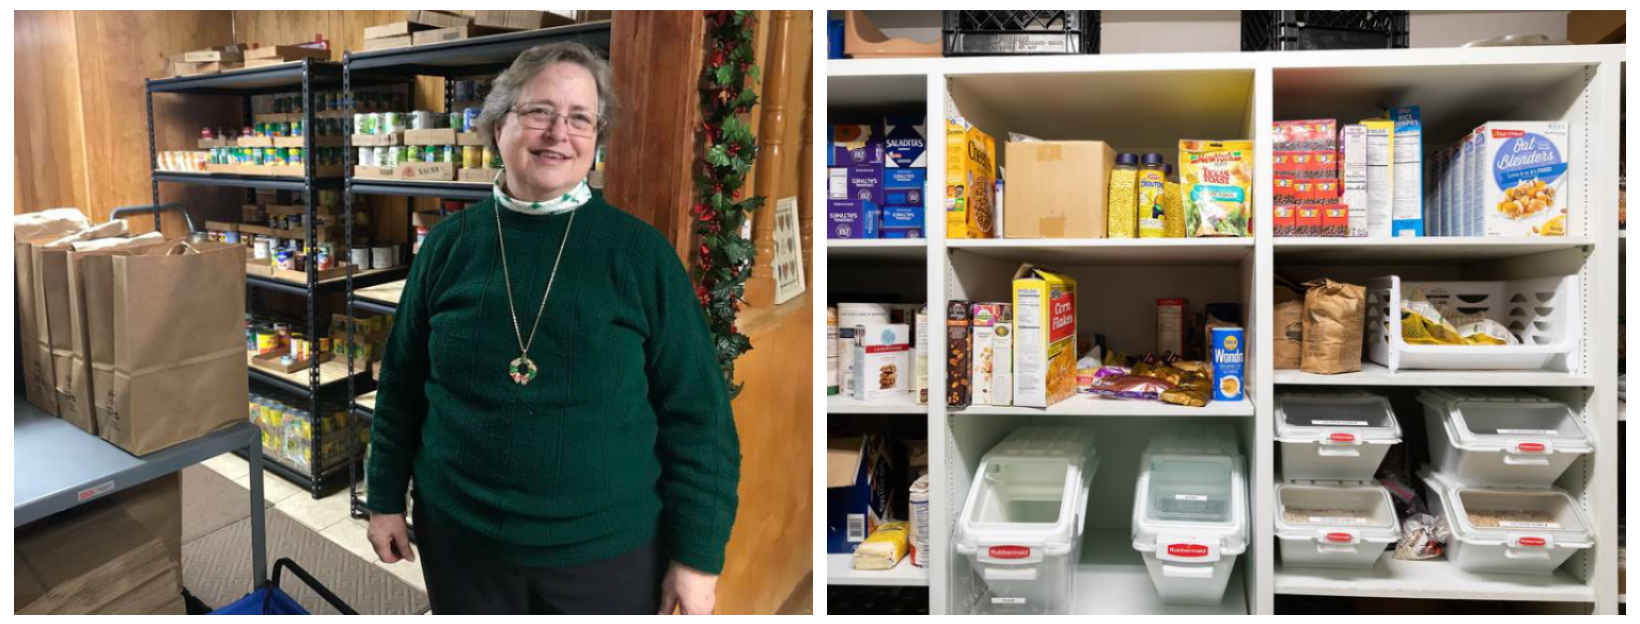 First: Sherry Carroll is the director of Grace Place Ministries in Stephenville. Last: The pantry is stocked at Abilene Hope Haven homeless shelter.